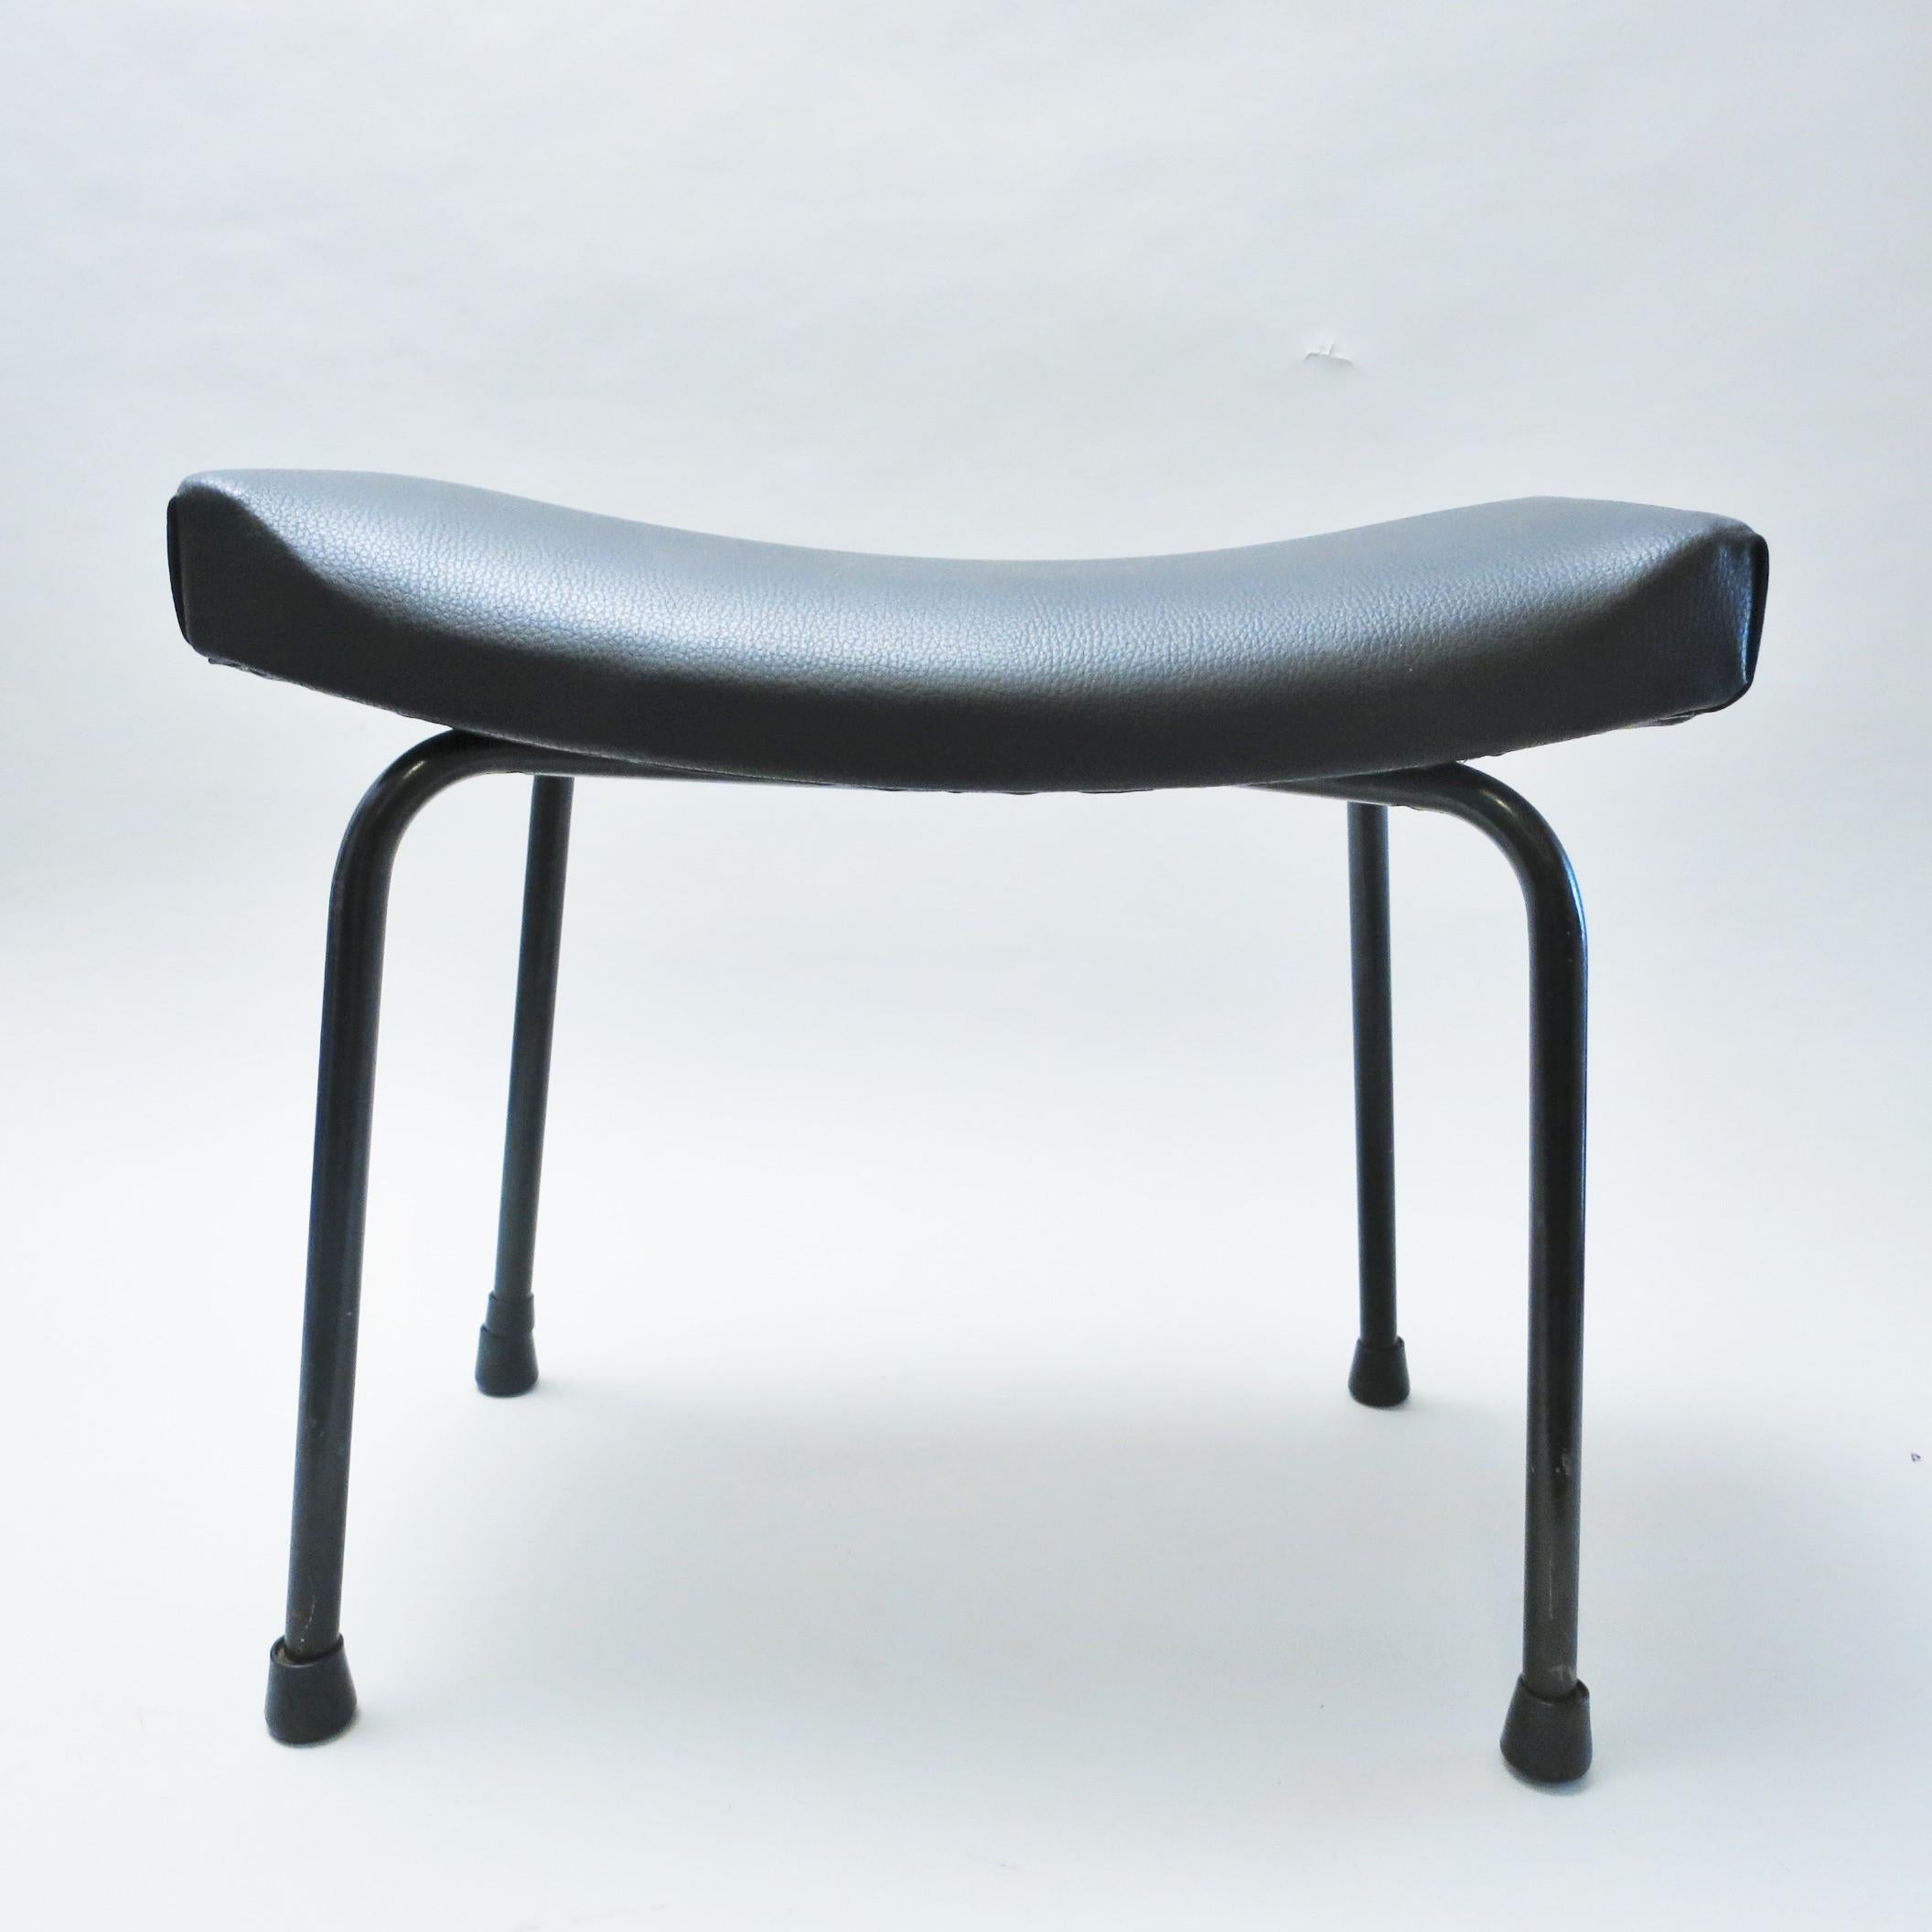 Stool Taureau by French designer Pierre Guariche for Meurop in the 1950s.